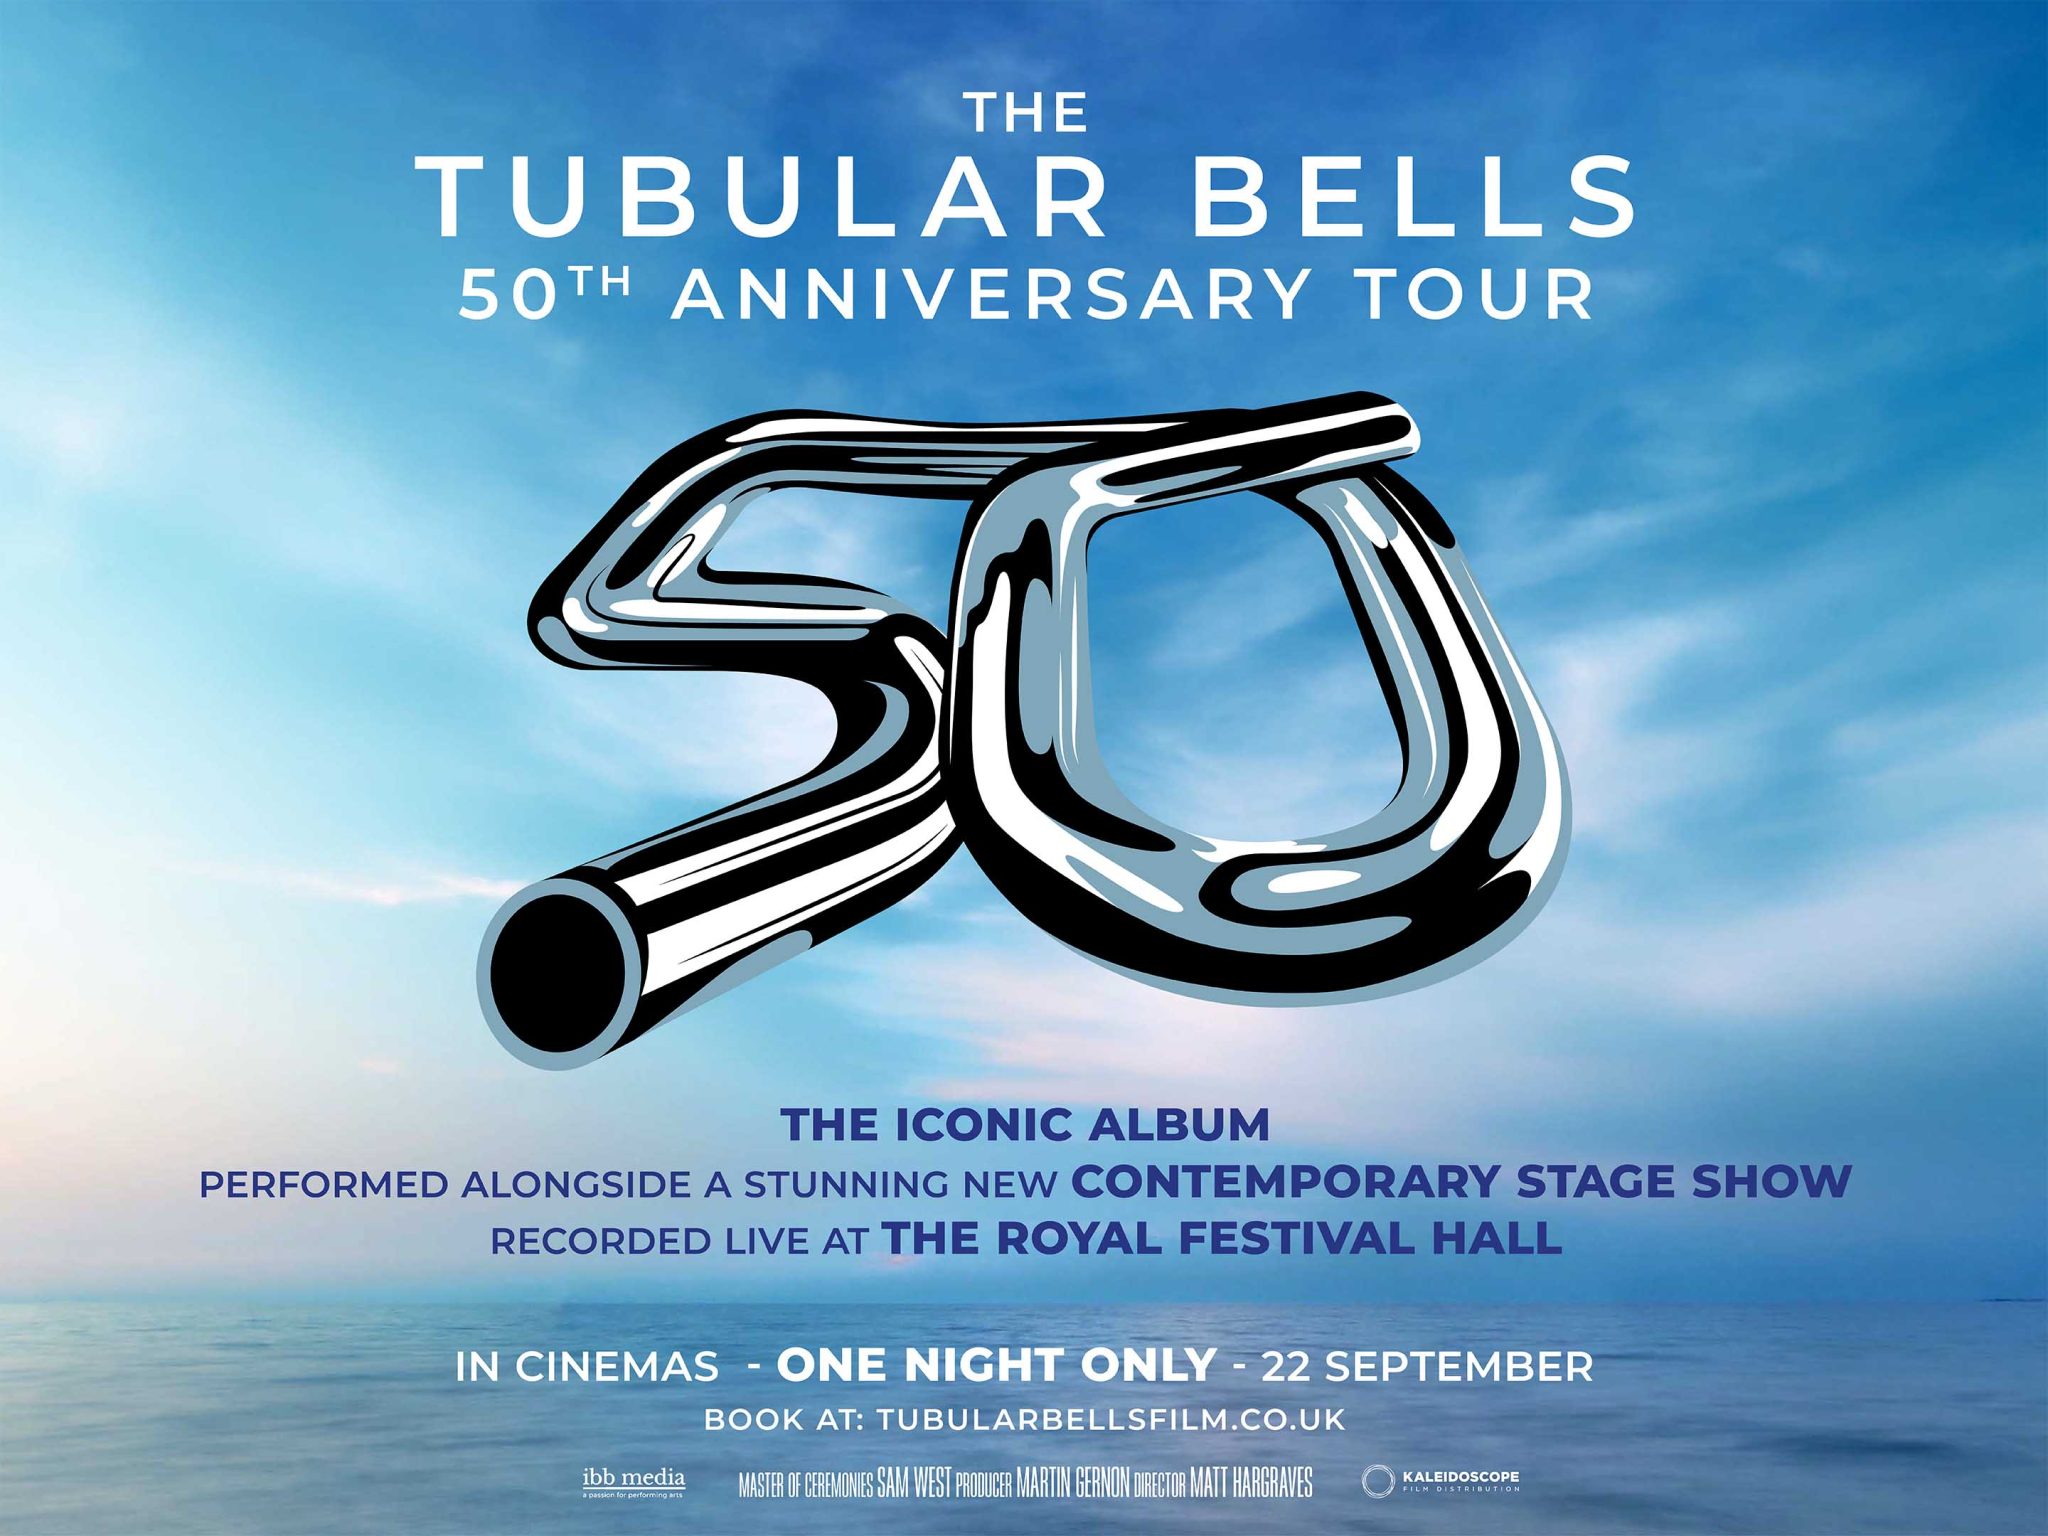 The Tubular Bells 50th Anniversary Tour Live Concert and Contemporary